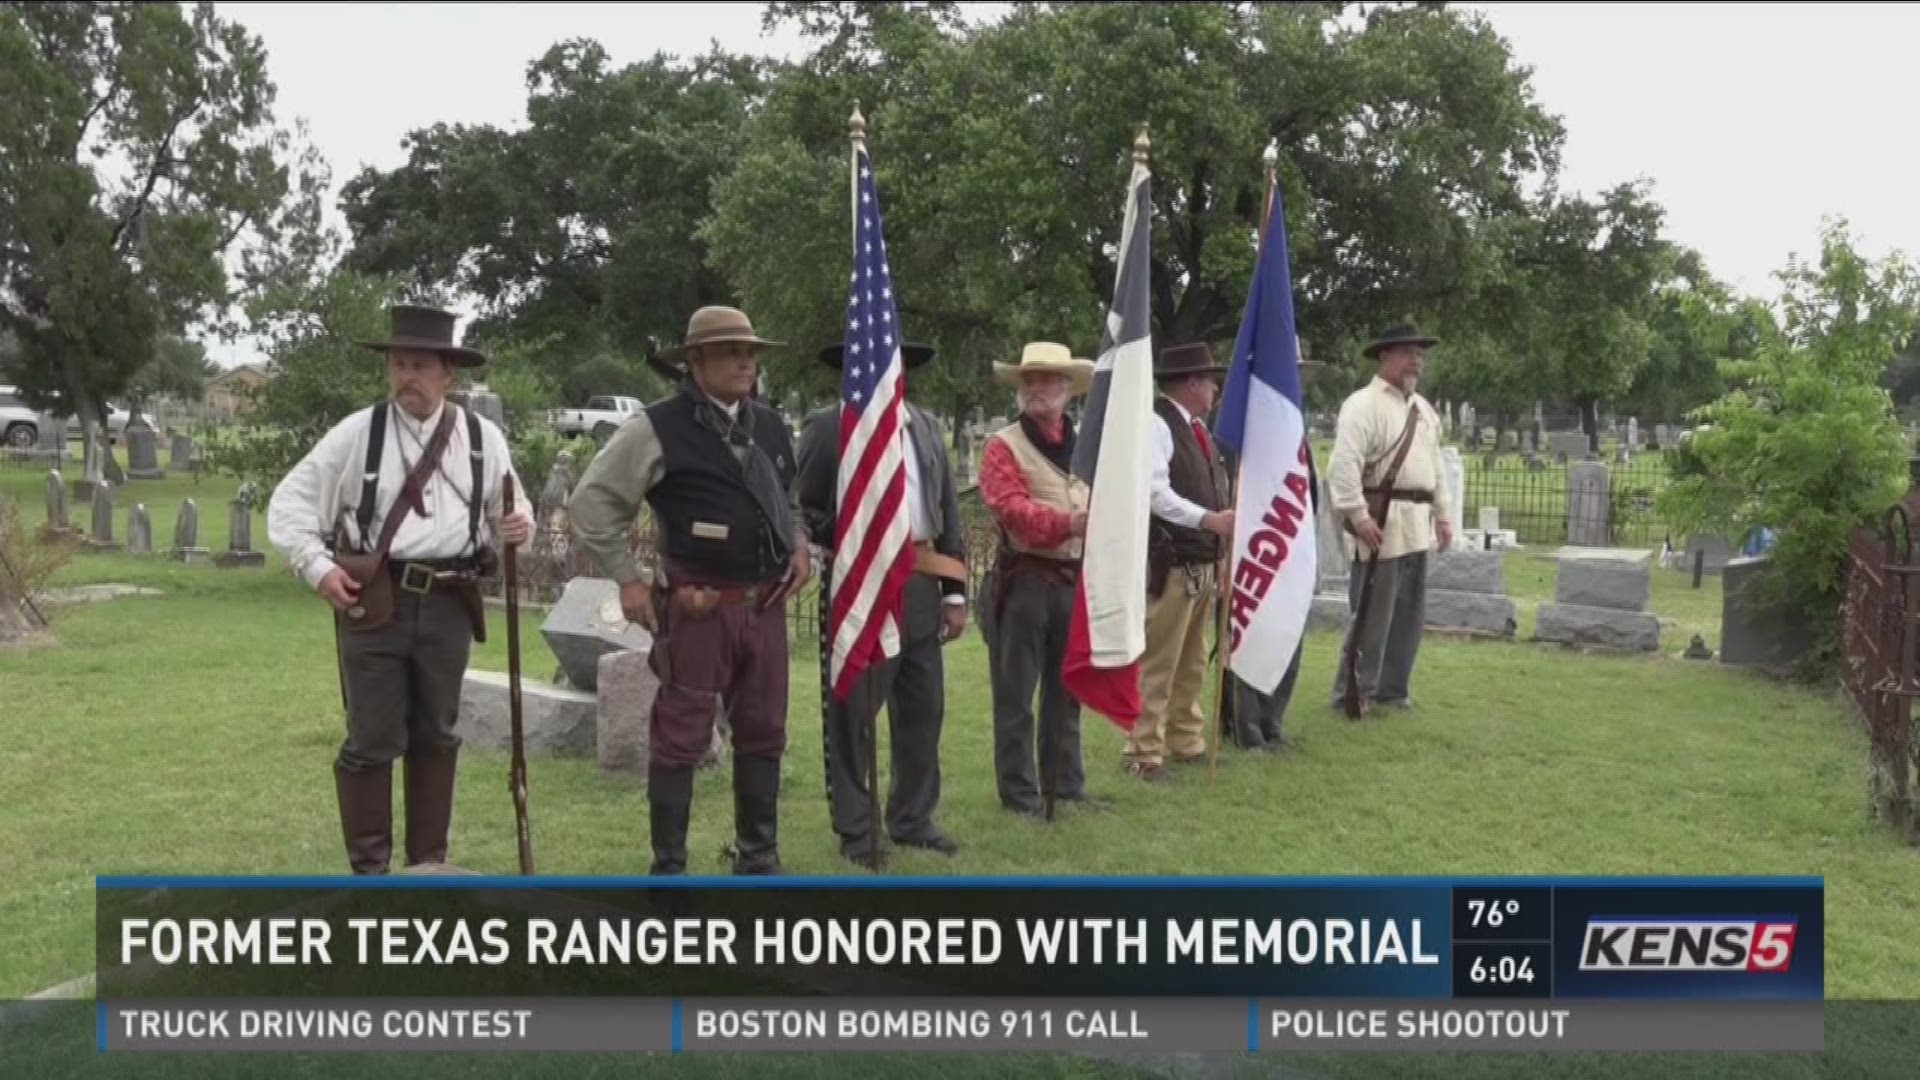 Retired Texas Ranger is honored for his time in law enforcement